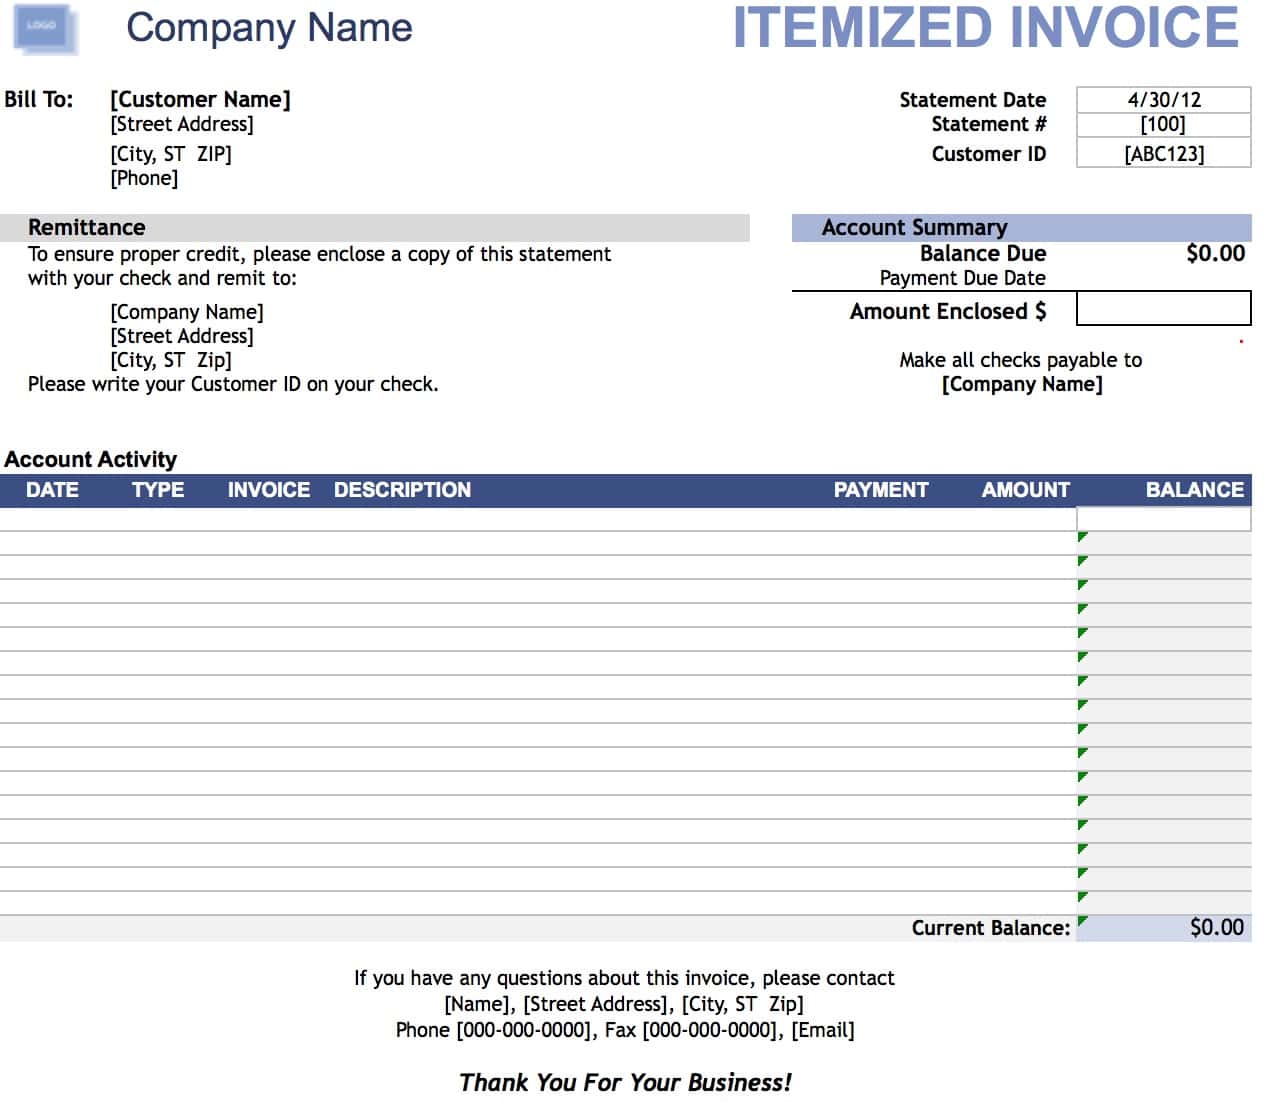 Invoice Home And Invoice Maker Free